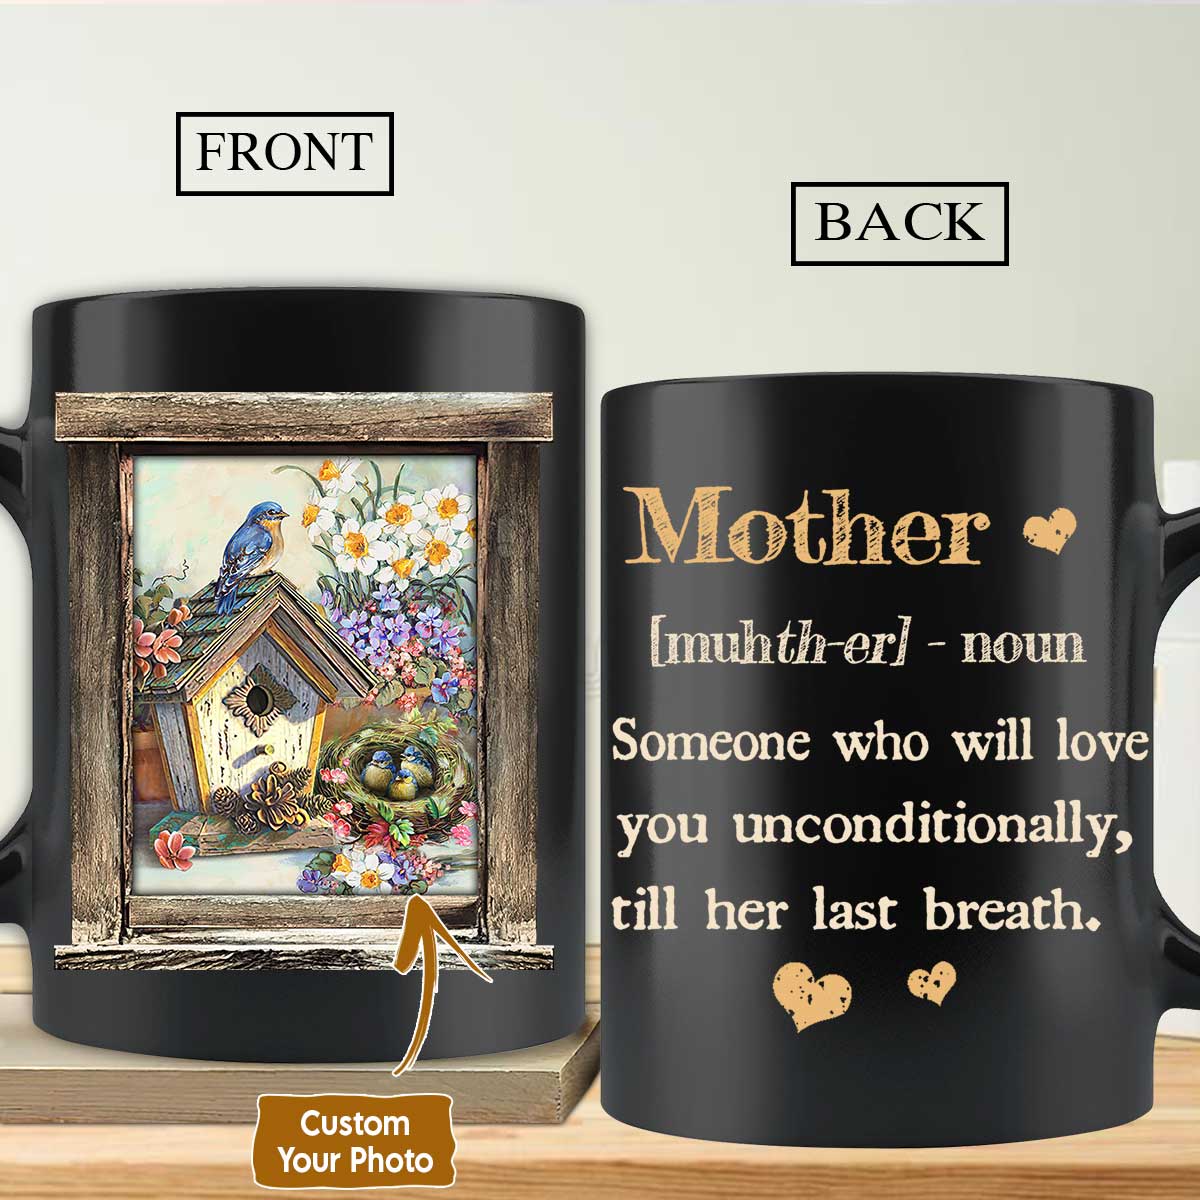 Gift For Mom Personalized Mug - Daughter to mom, Beautiful birdhouse, Flower Mug - Custom Gift For Mother's Day, Presents for Mom - Mother love Mug